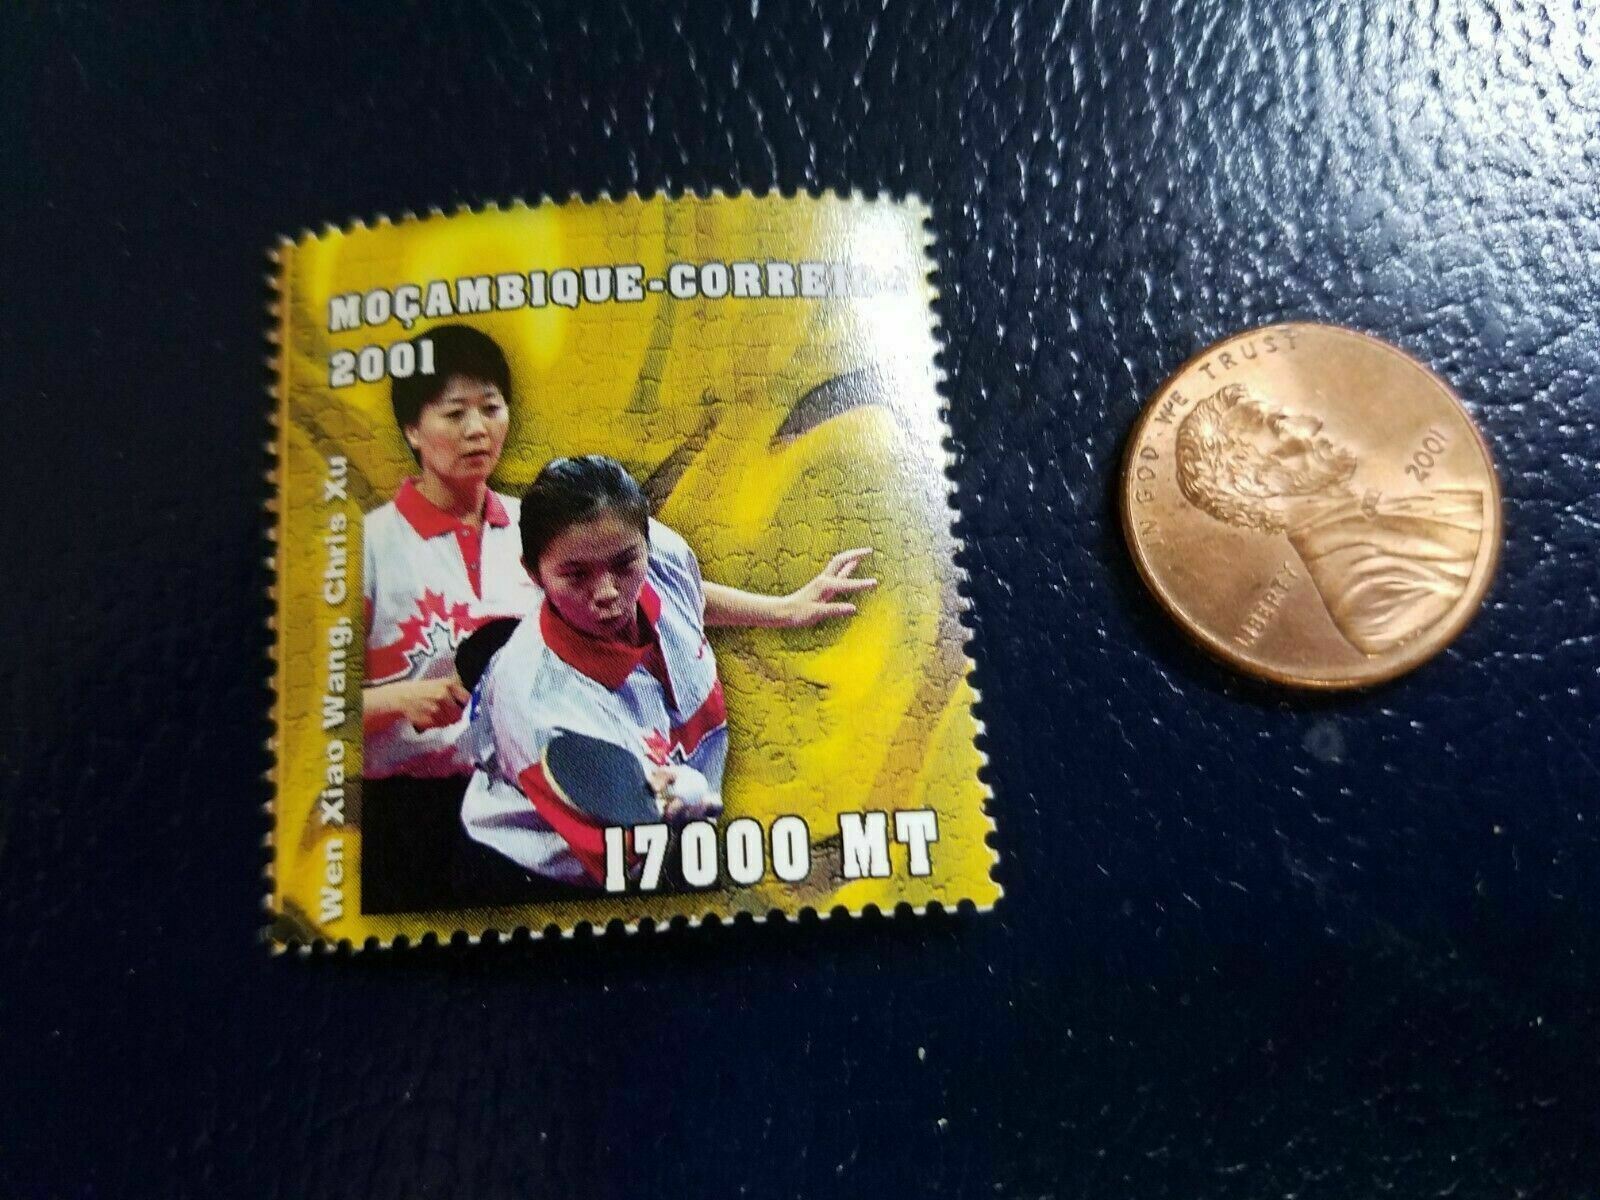 Wen Xiao Wang Chris Xu Table Tennis 2001 Mocambique Correios Perforated Stamp